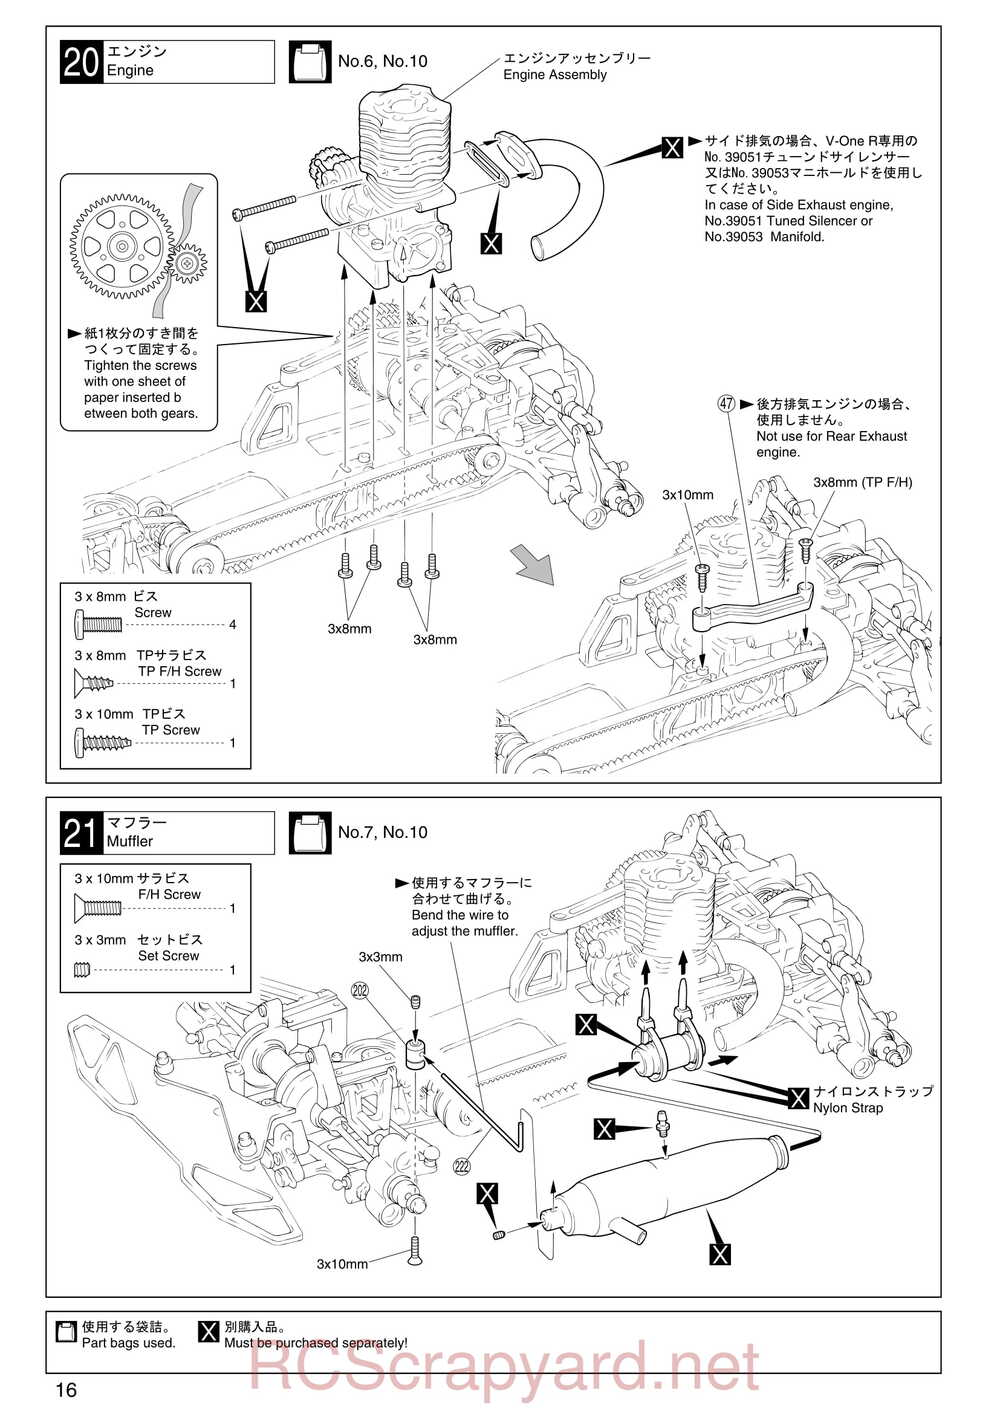 Kyosho - 31102 - V-One RR - Manual - Page 16